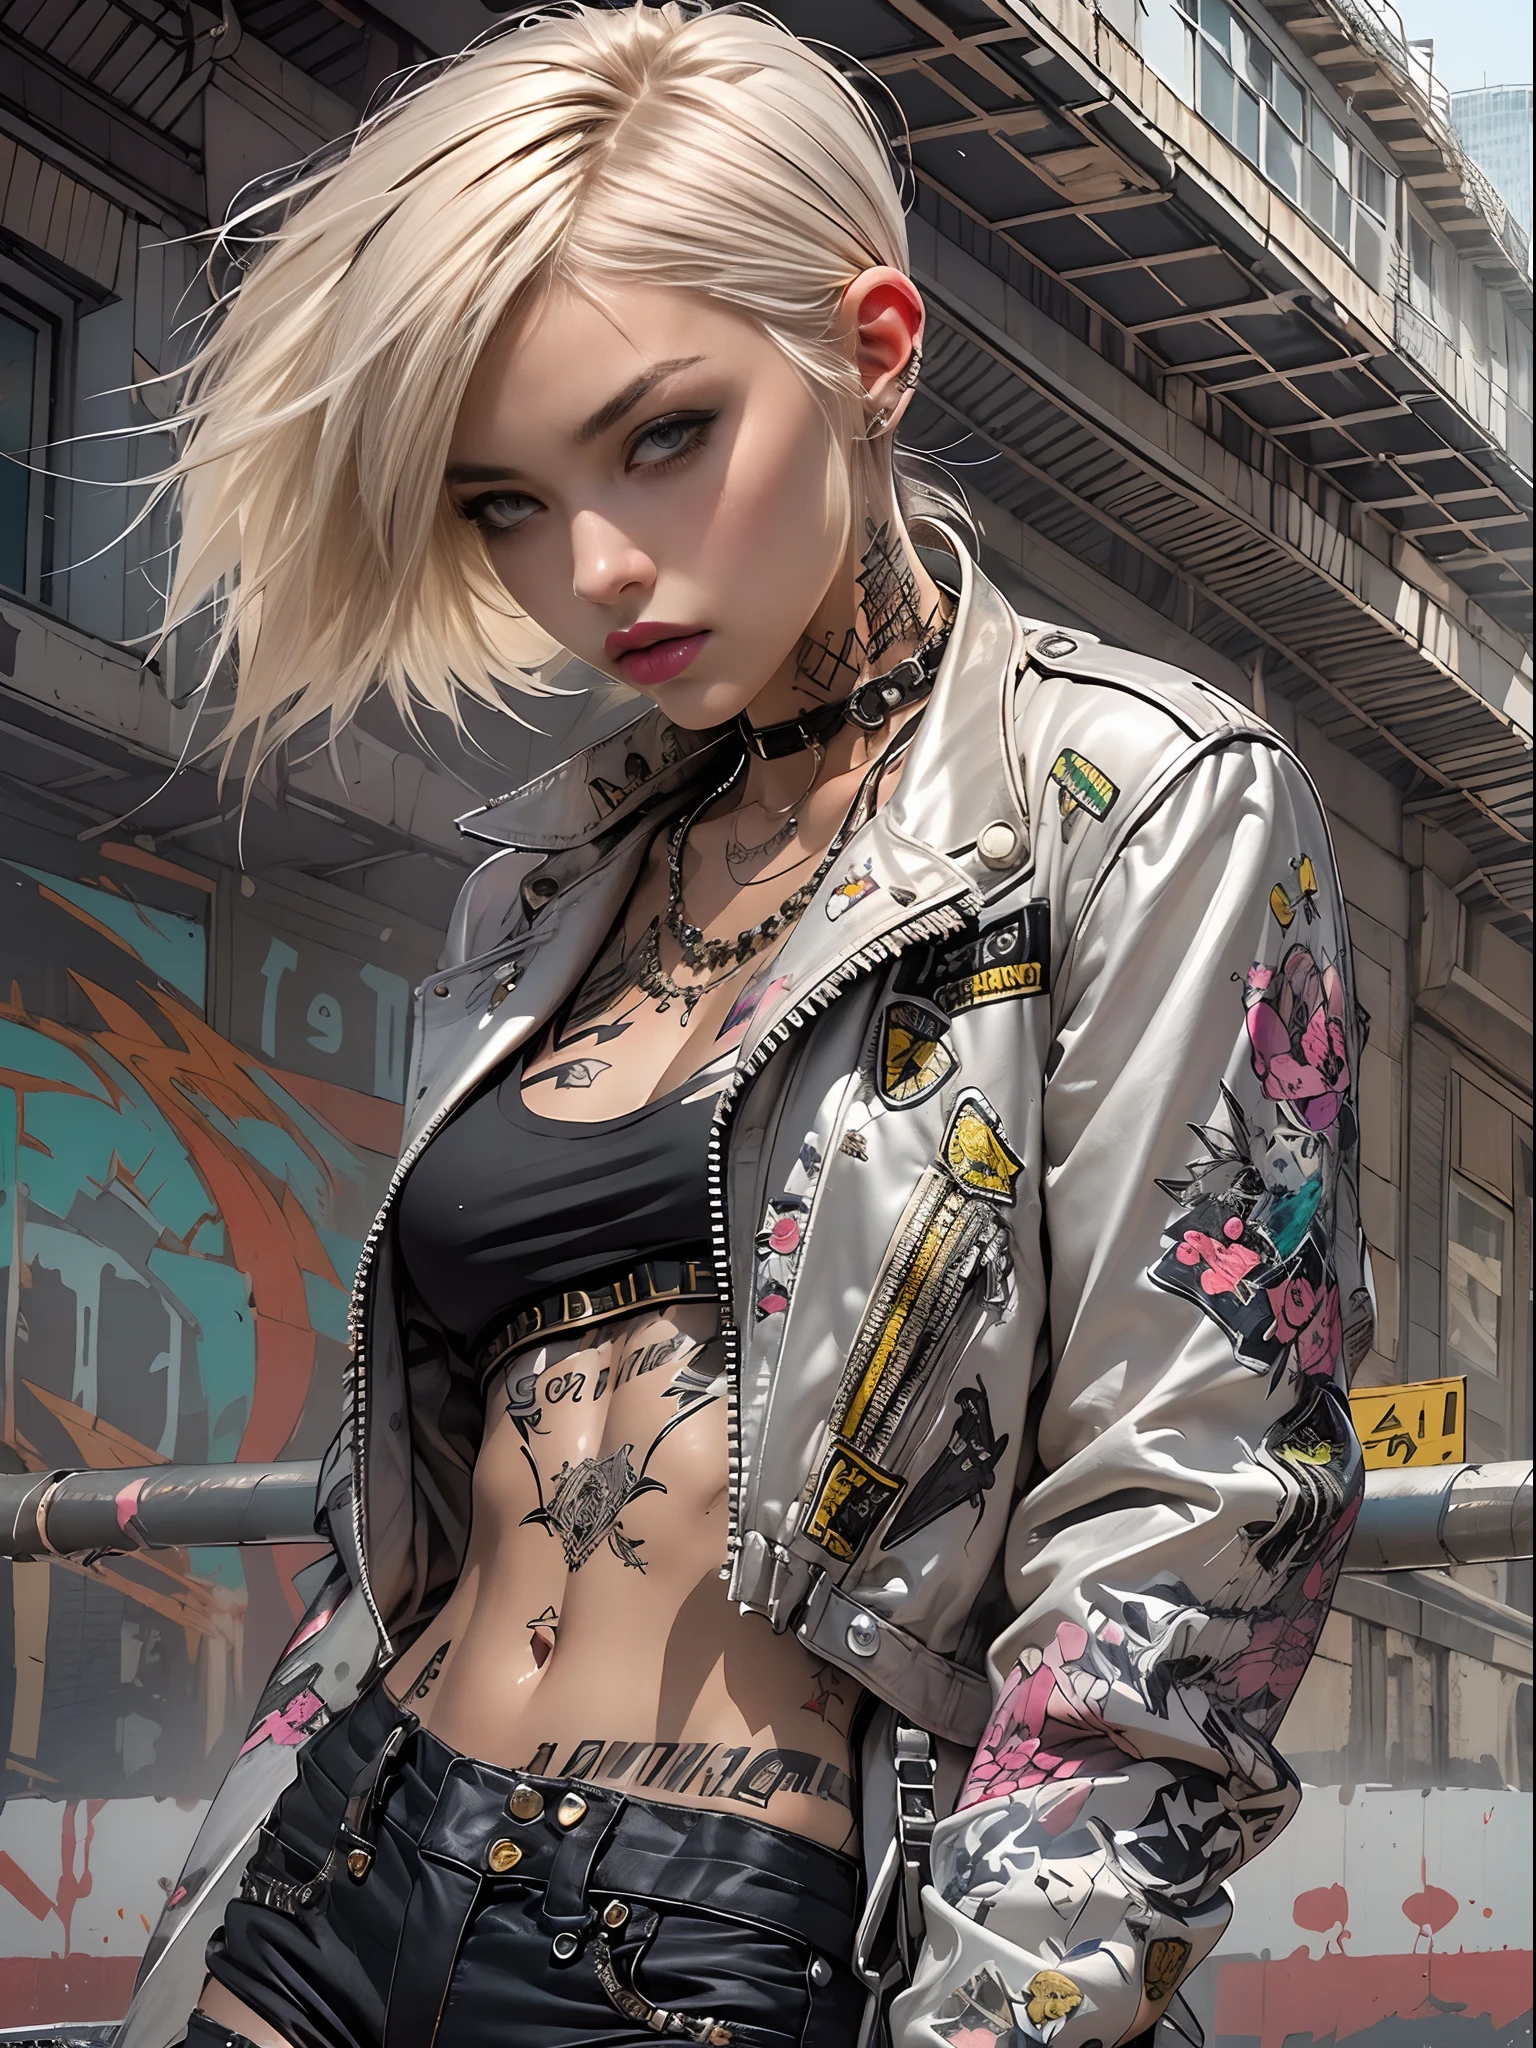 (((of the highest quality: 1.4))),(unparalleled masterpiece ever), (Ultra high definition),(Ultra-realistic 8K CG), offcial art、 (((adult body))), (((1girl in))), ((( Bob Shorthair ))), Punk girl with a perfect body, Jacket with metal spines,Beautiful and well-groomed face,,Detailed punk fashion,leather jackets, (Image from head to thigh),(( White Blonde Bob Shorthair )), Small leather panties, Simon Bisley's urban savage style,Detailed London street background,Clean abs, Complex graphics, Dark pink with white stars and gray and white stripes, (( Many poison tattoos )), ,